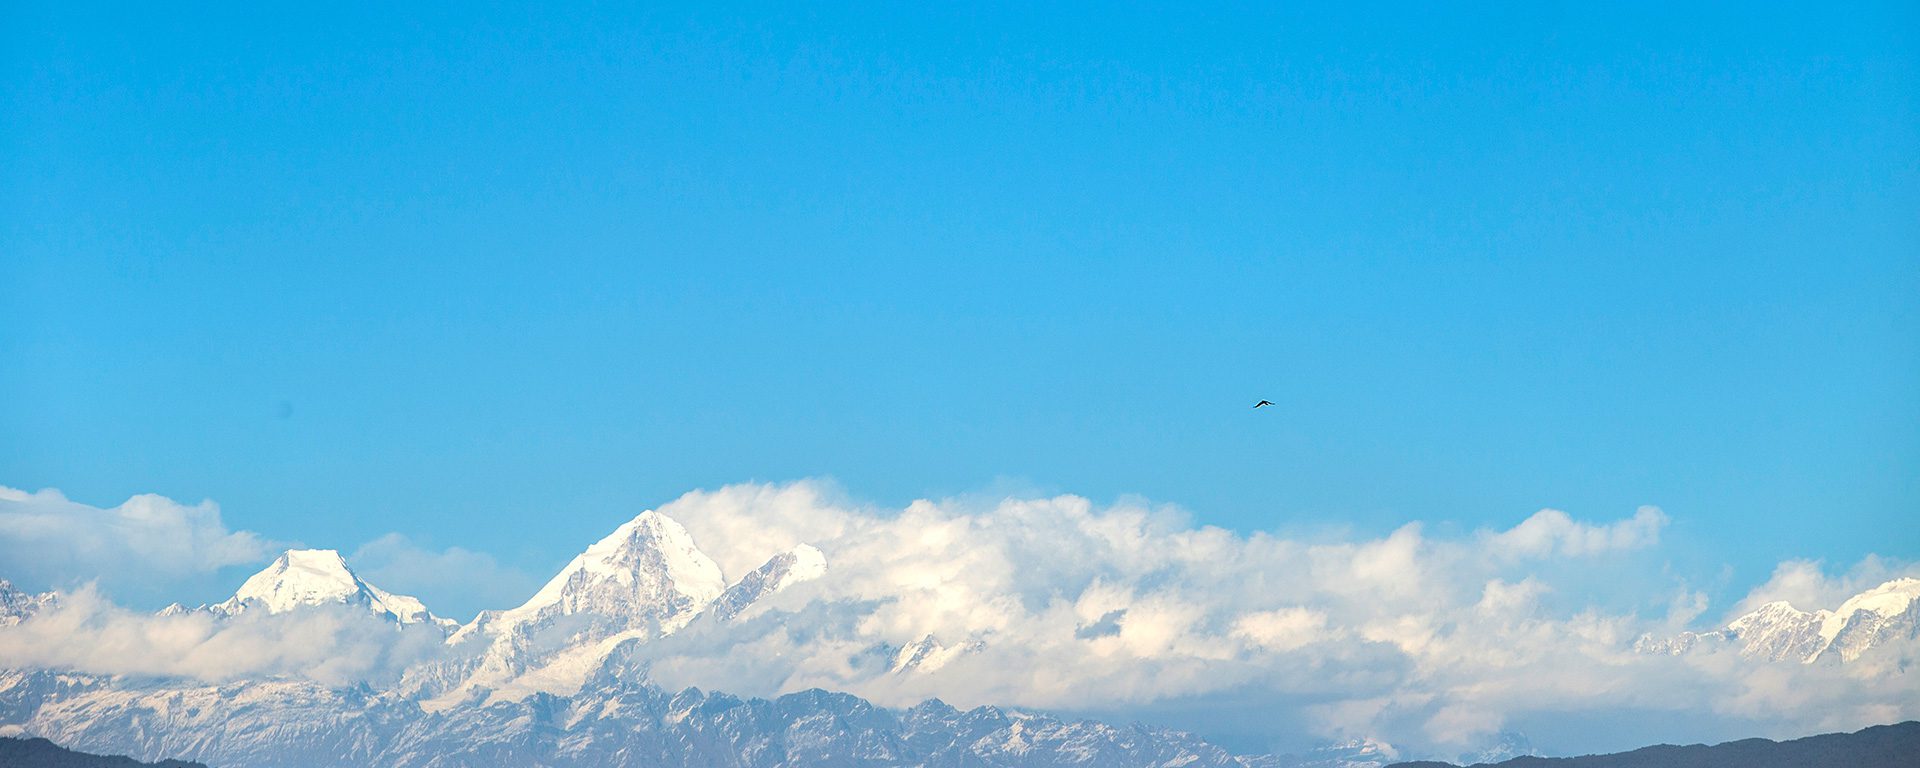 BRINGING BACK BLUE SKIES: OUR CAMPAIGN FOR CLEAN AIR Nepali